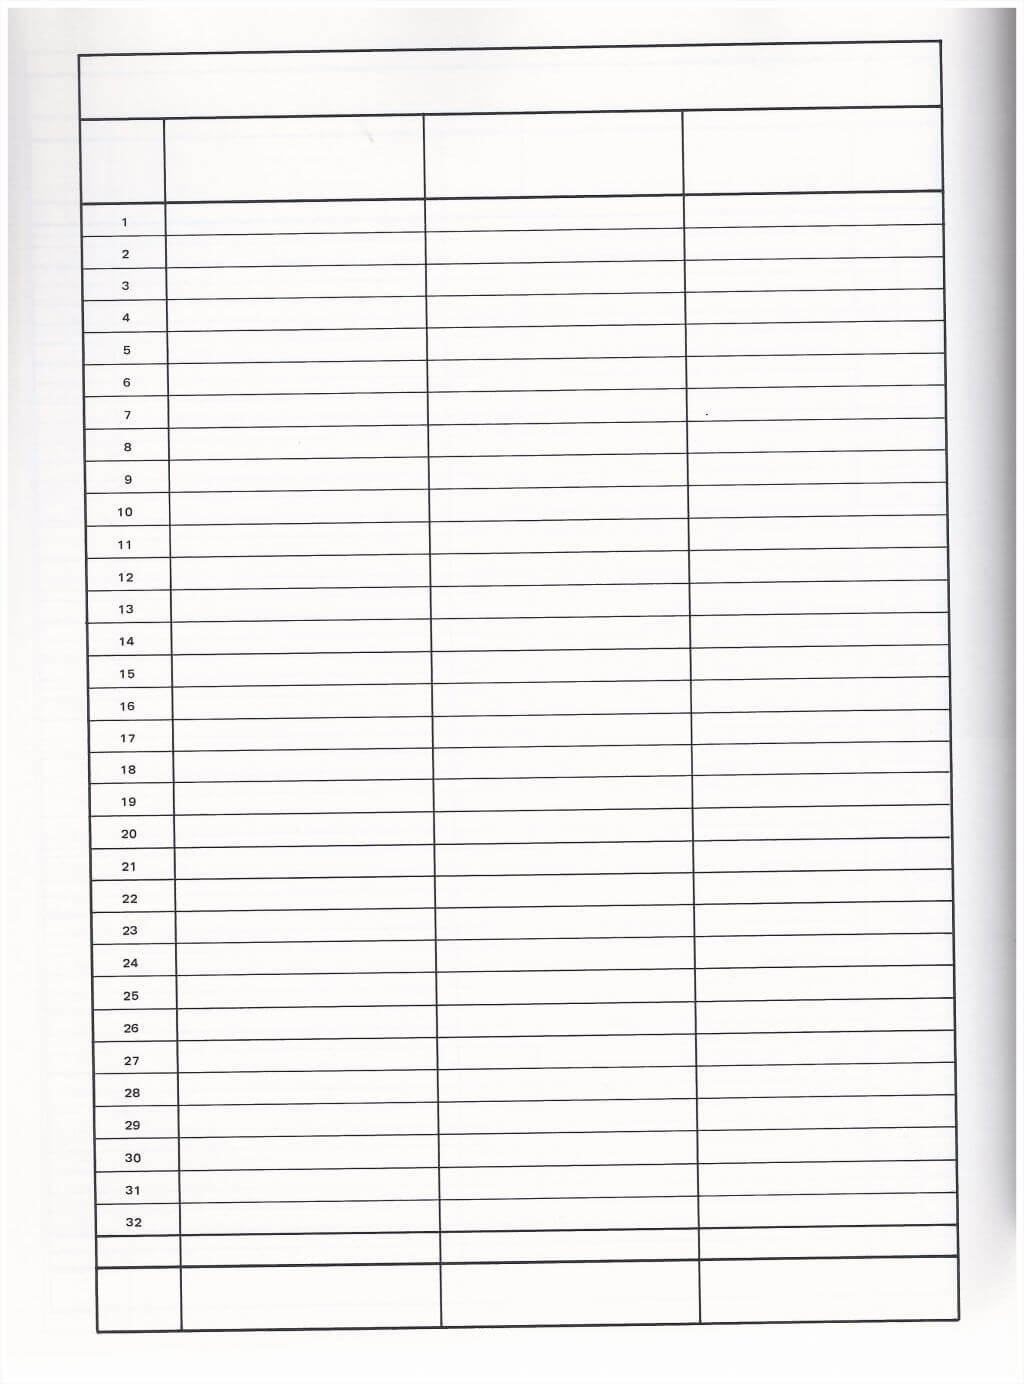 10 Best Images Of Printable Blank Charts With Columns 4 3 In 3 Column